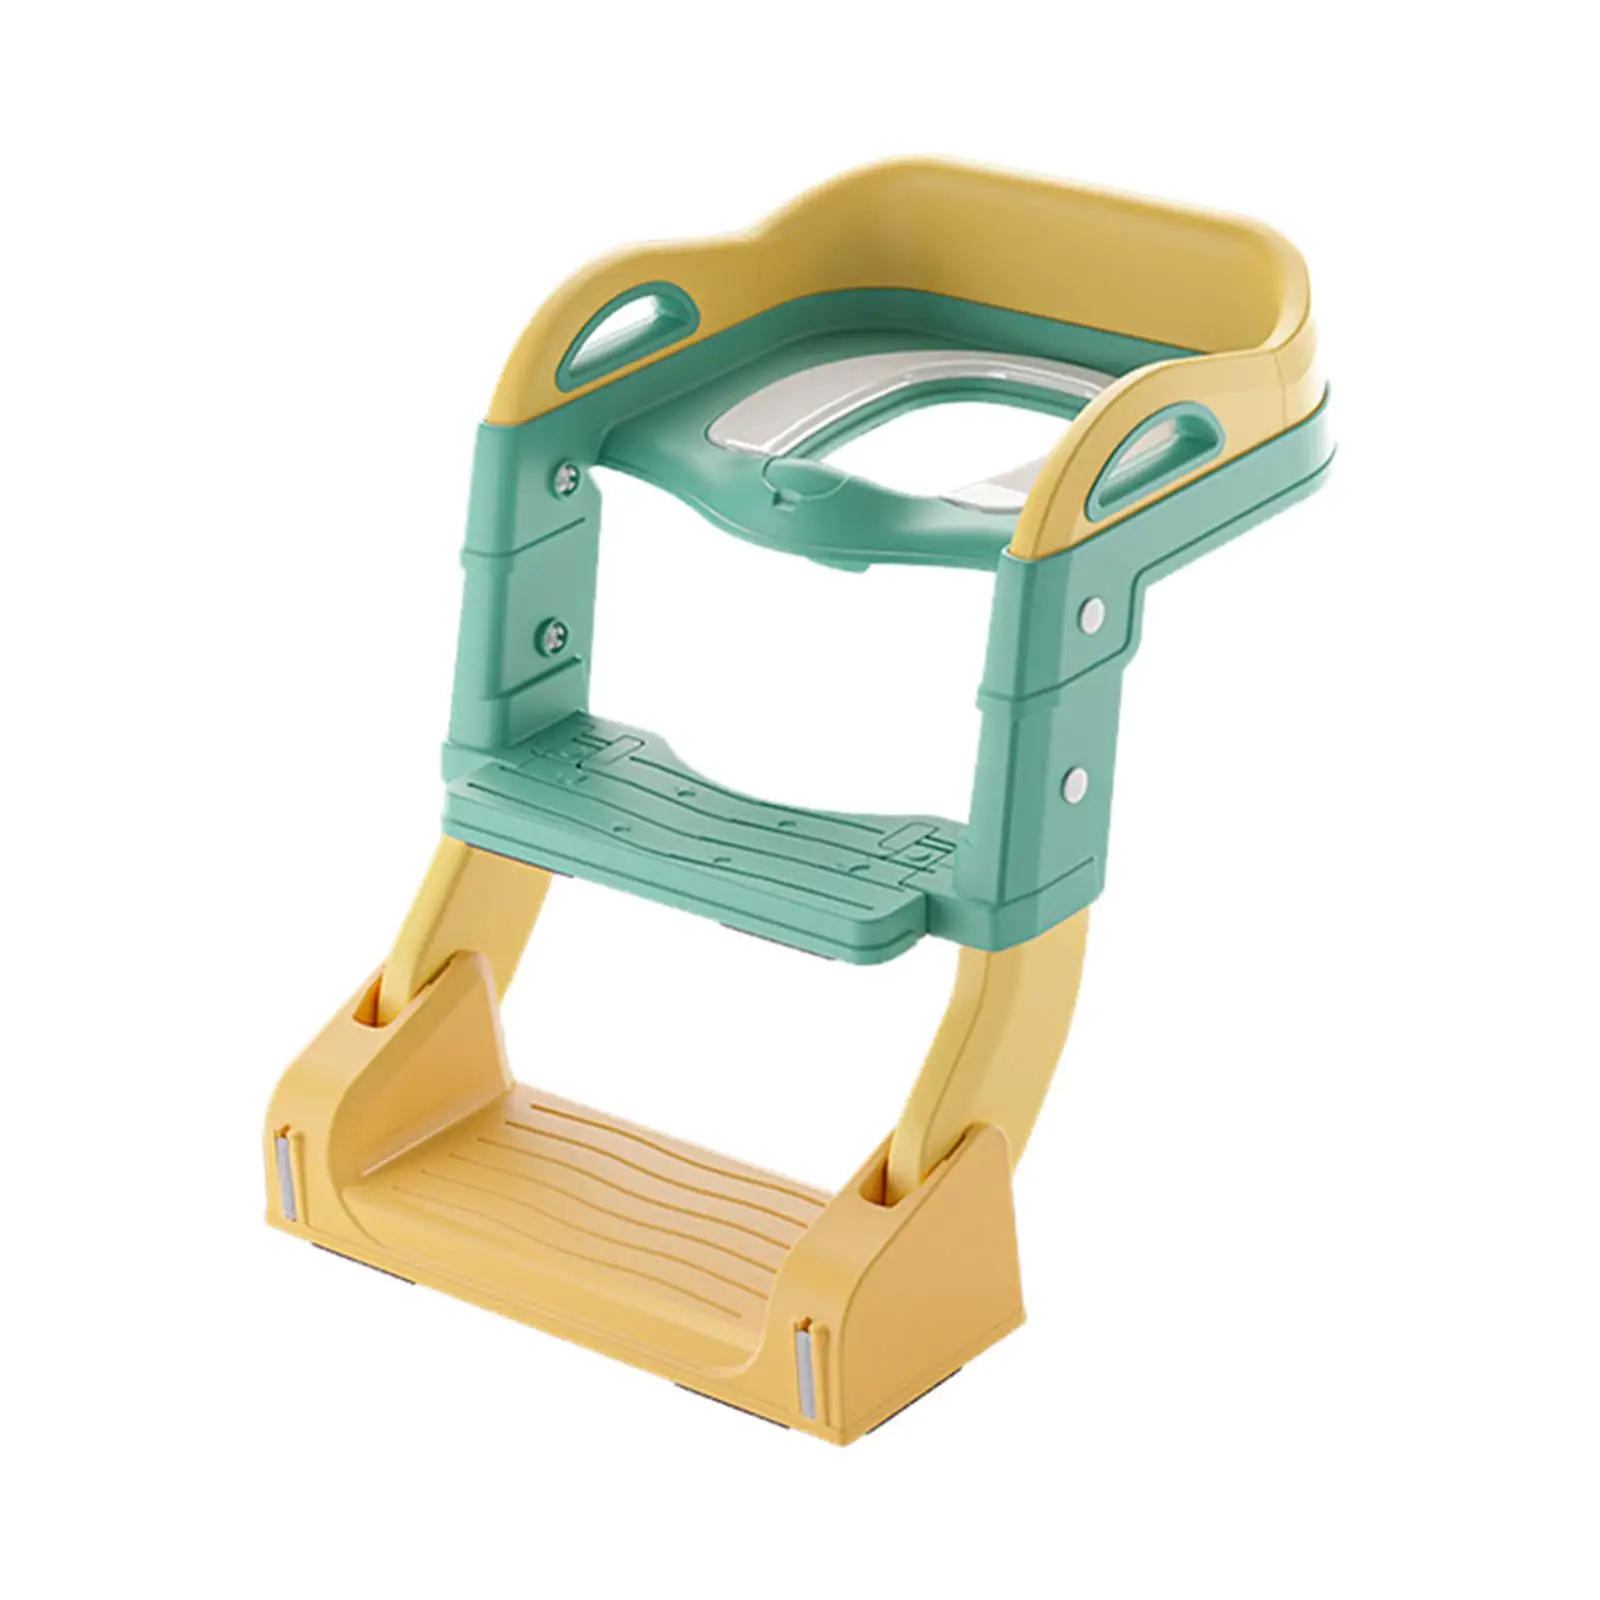 Kids Toilet Training Seat with Ladder Baby Infant Potty Removable and Washable Soft Seat Cushion Foldable Toilet Trainer Seat